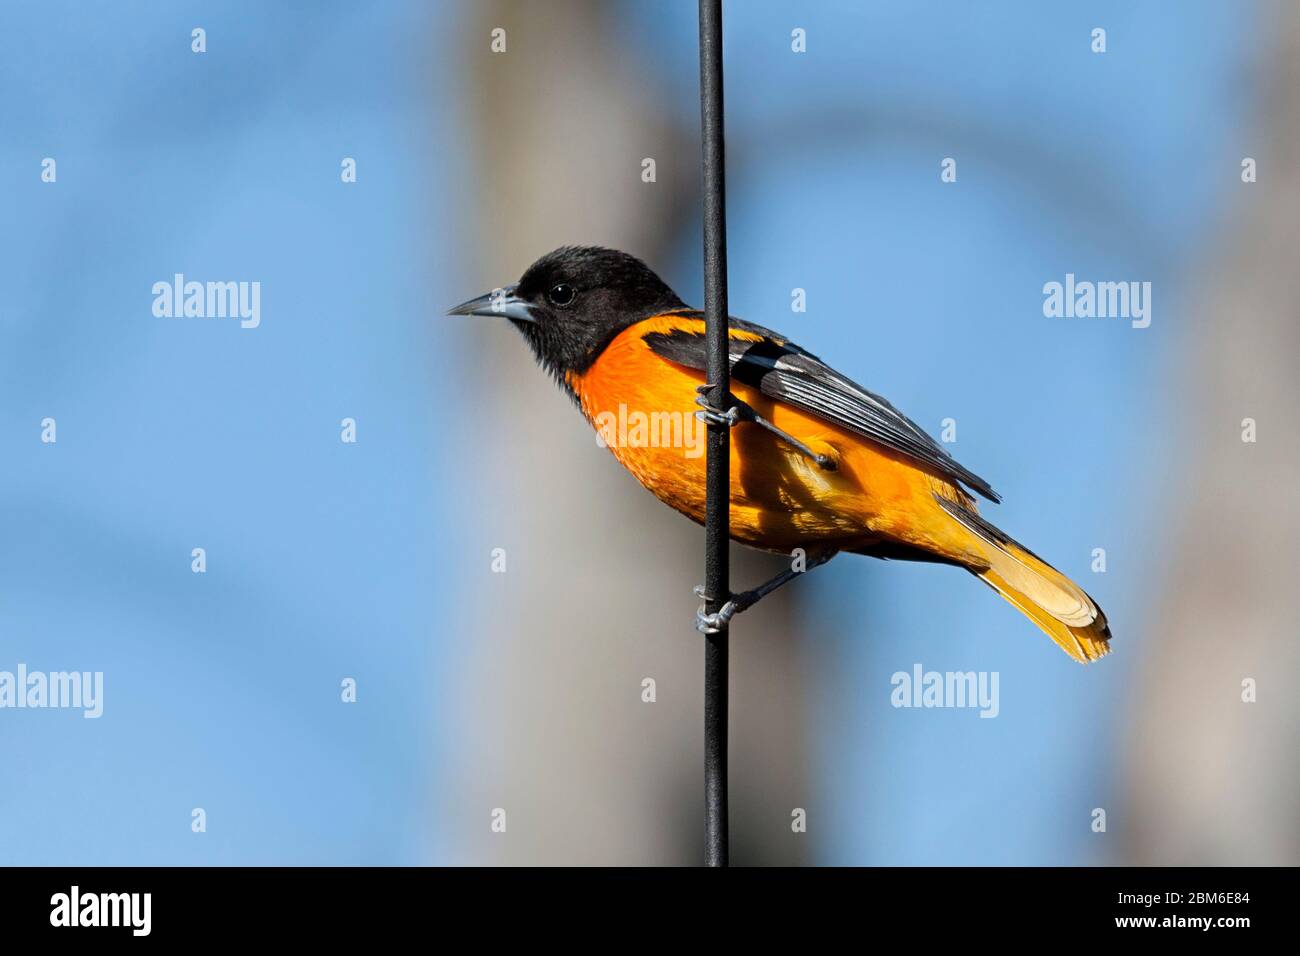 Profile of a Baltimore Oriole hanging on a metal pole. Blue sky and blurred brown tree are the background. Stock Photo